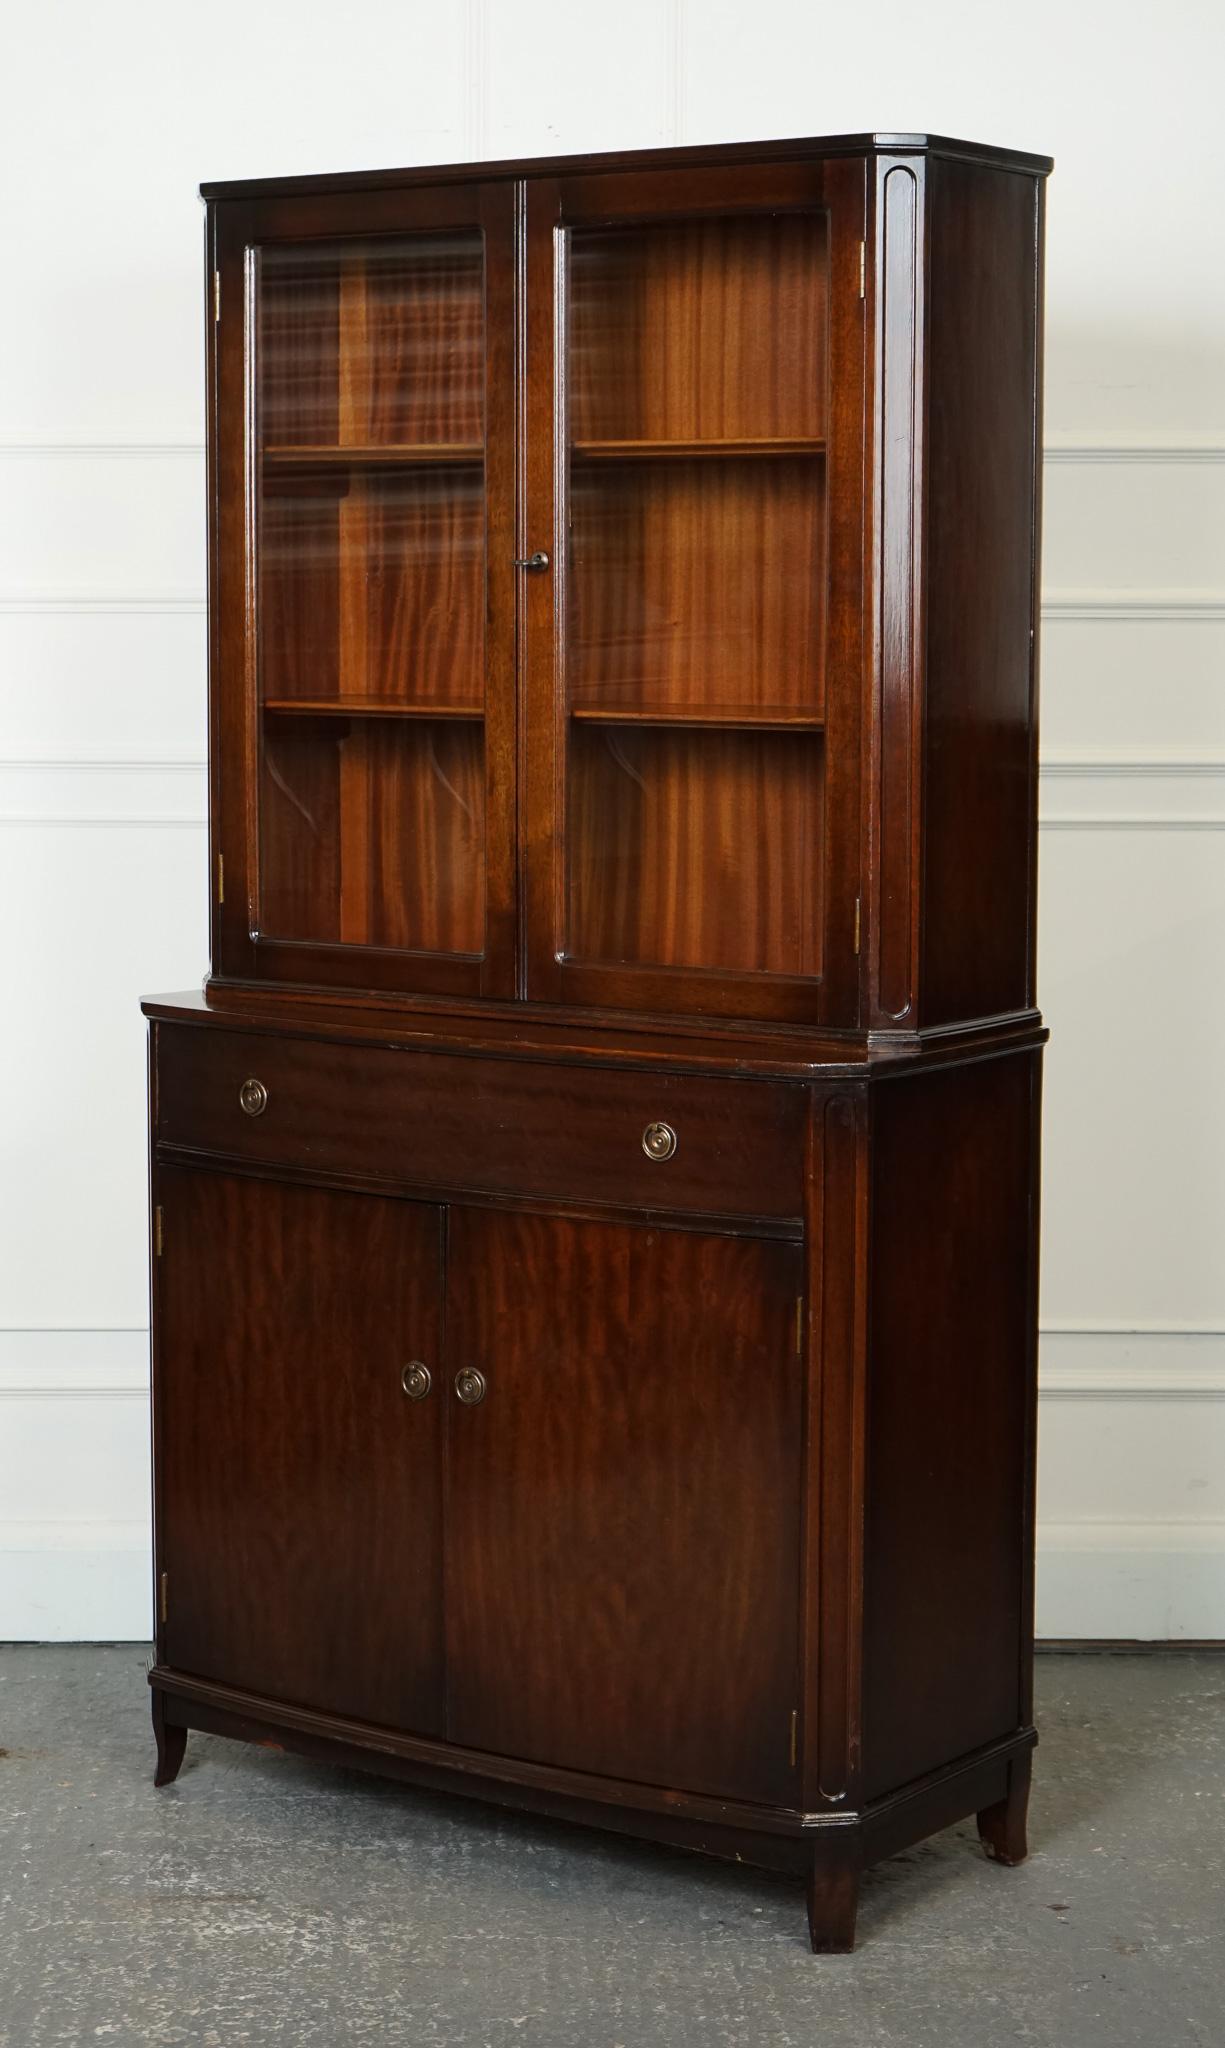 

We are delighted to offer for sale this Regency Style Hardwood Bookcase Cabinet With Glazed Doors.

This bookcase is compact and fits perfectly in smaller homes.

A Regency-style hardwood bookcase cabinet with glazed doors is a sophisticated and